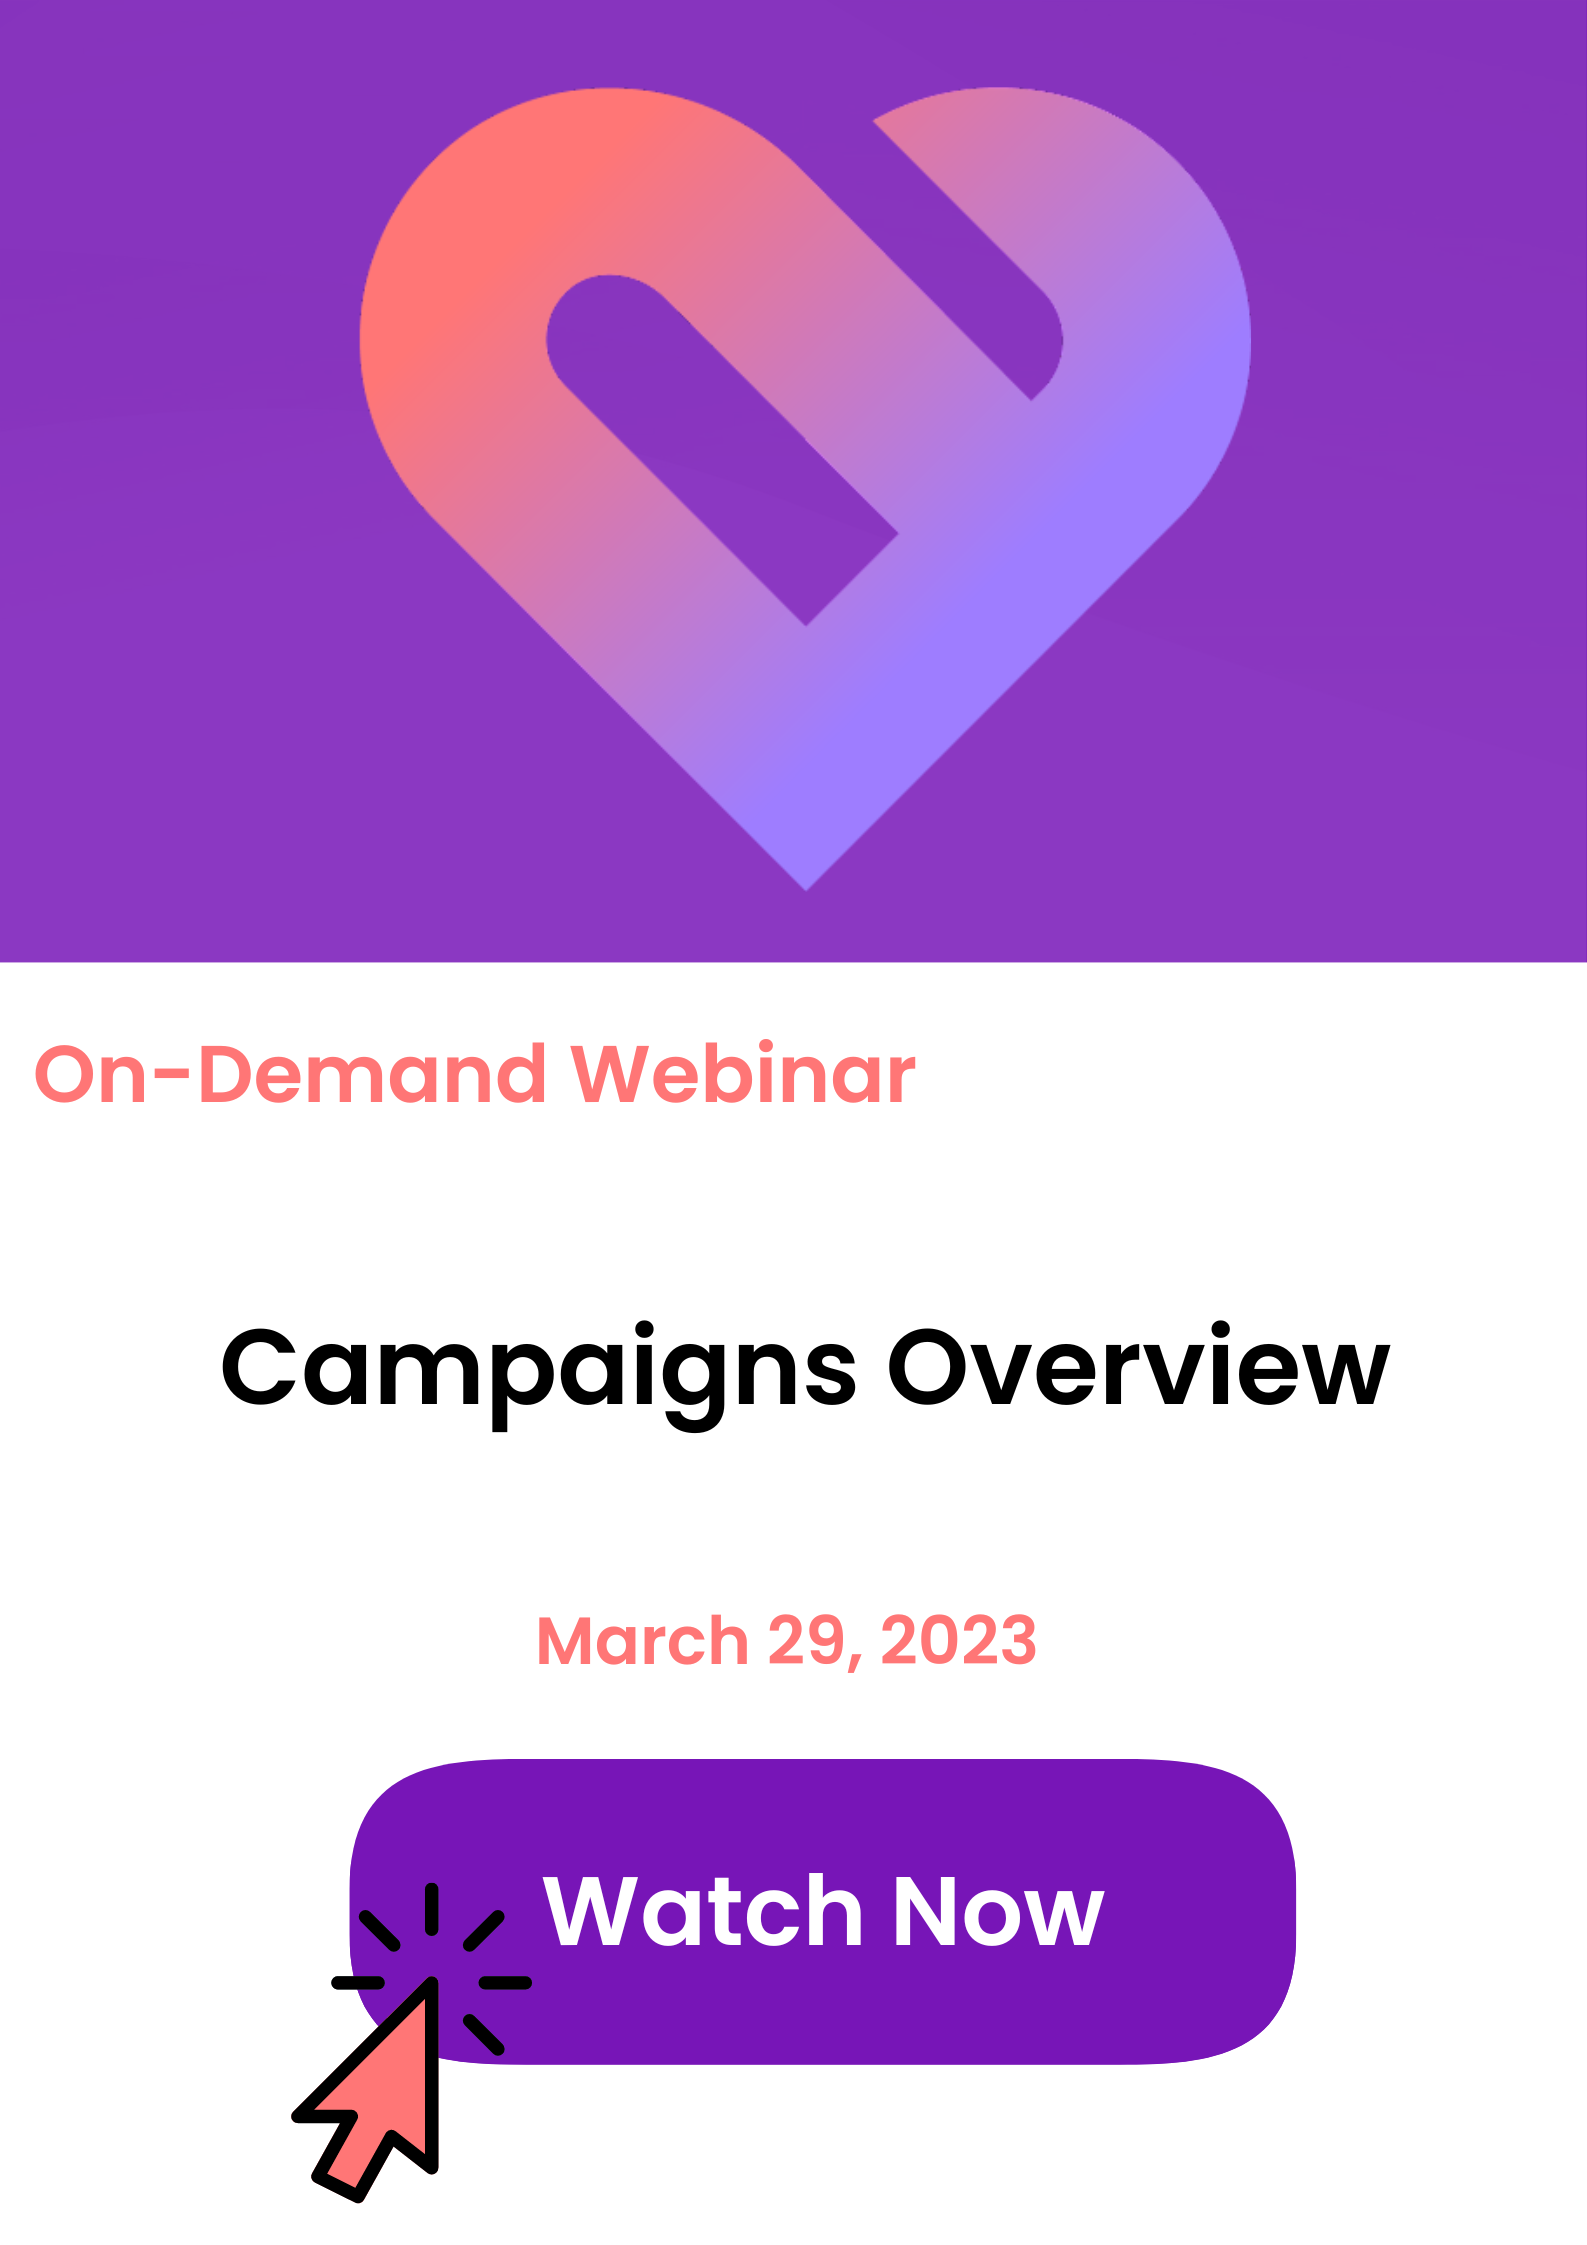 On-demand webinar tile for Campaigns Overview, click to watch now